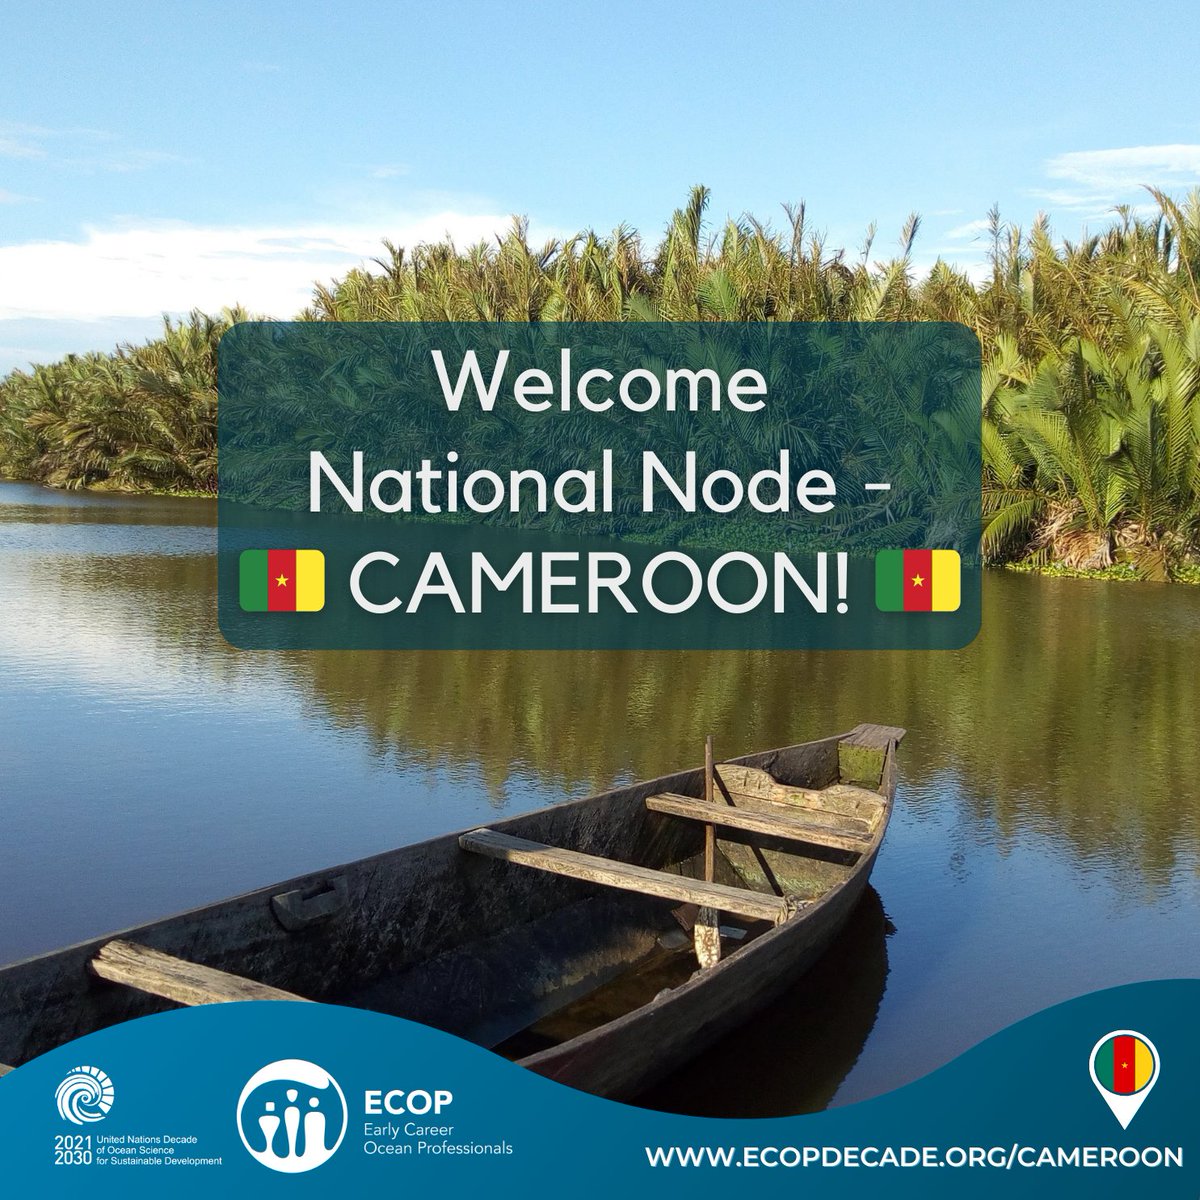 A warm welcome to ECOP Cameroon, and coordinators Alex Tamo, Forbah Sandra and Edmund Kounche who believe in the power of Early Career Ocean Professionals to shape the future of our blue planet. Head over to their page: ecopdecade.org/cameroon to learn more.